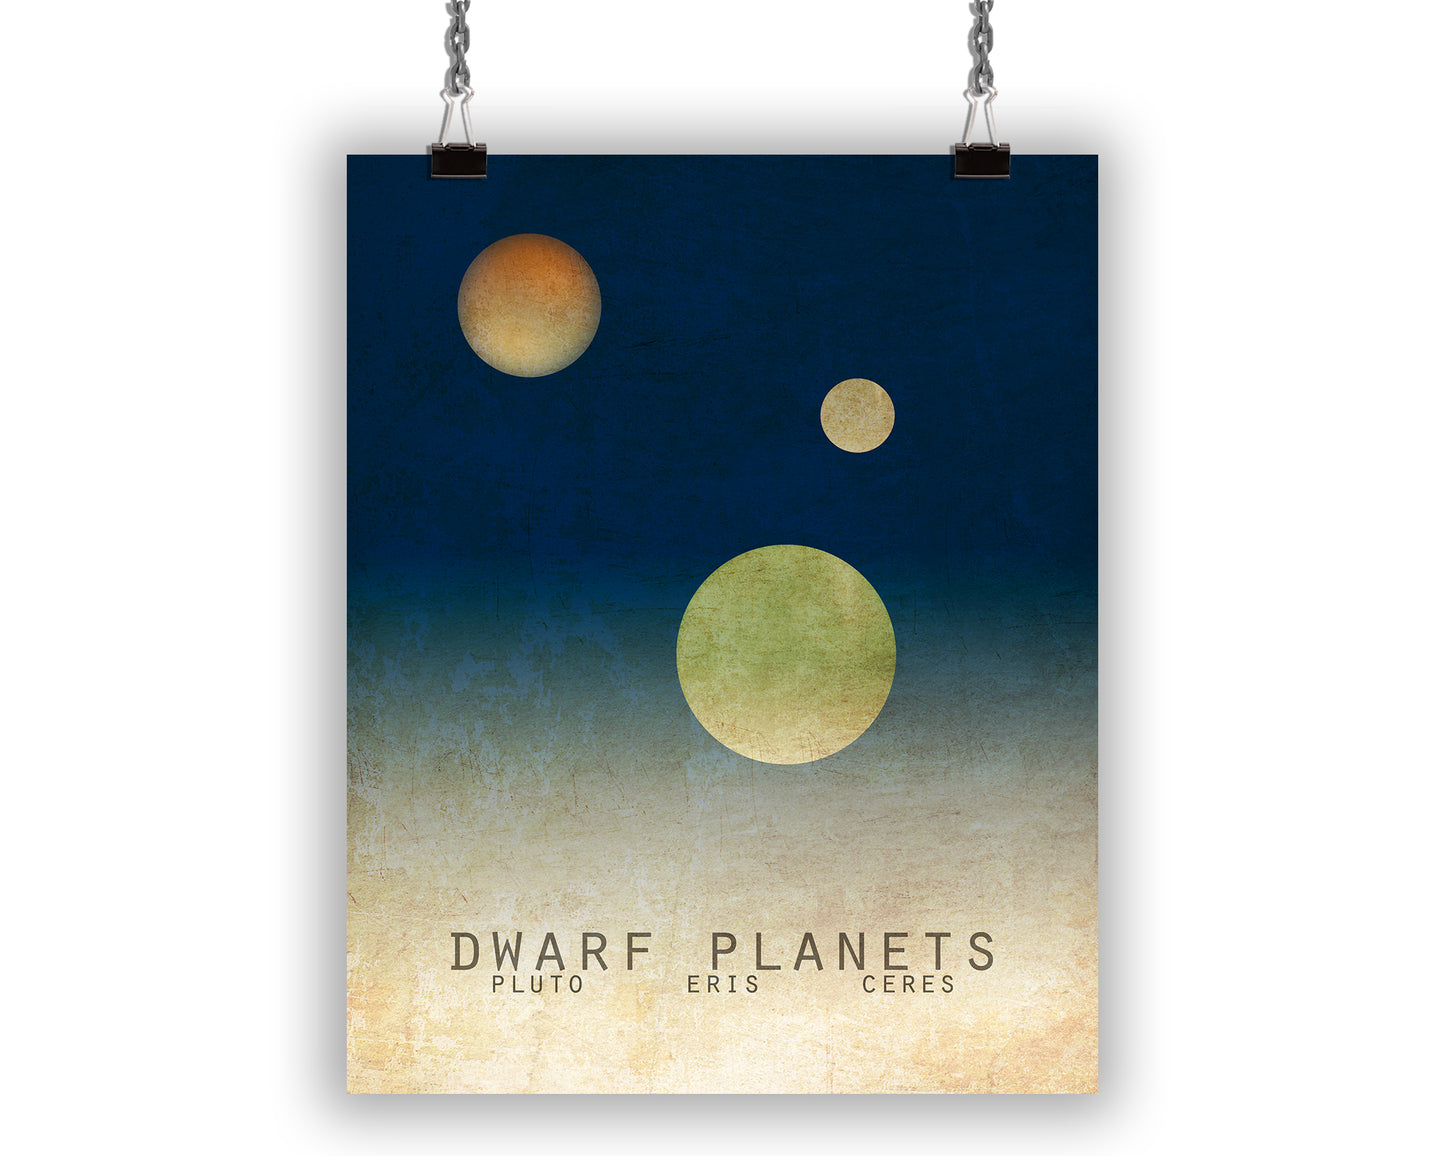 Dwarf Planets art print with minimalist images of Pluto, Eris, and Ceres